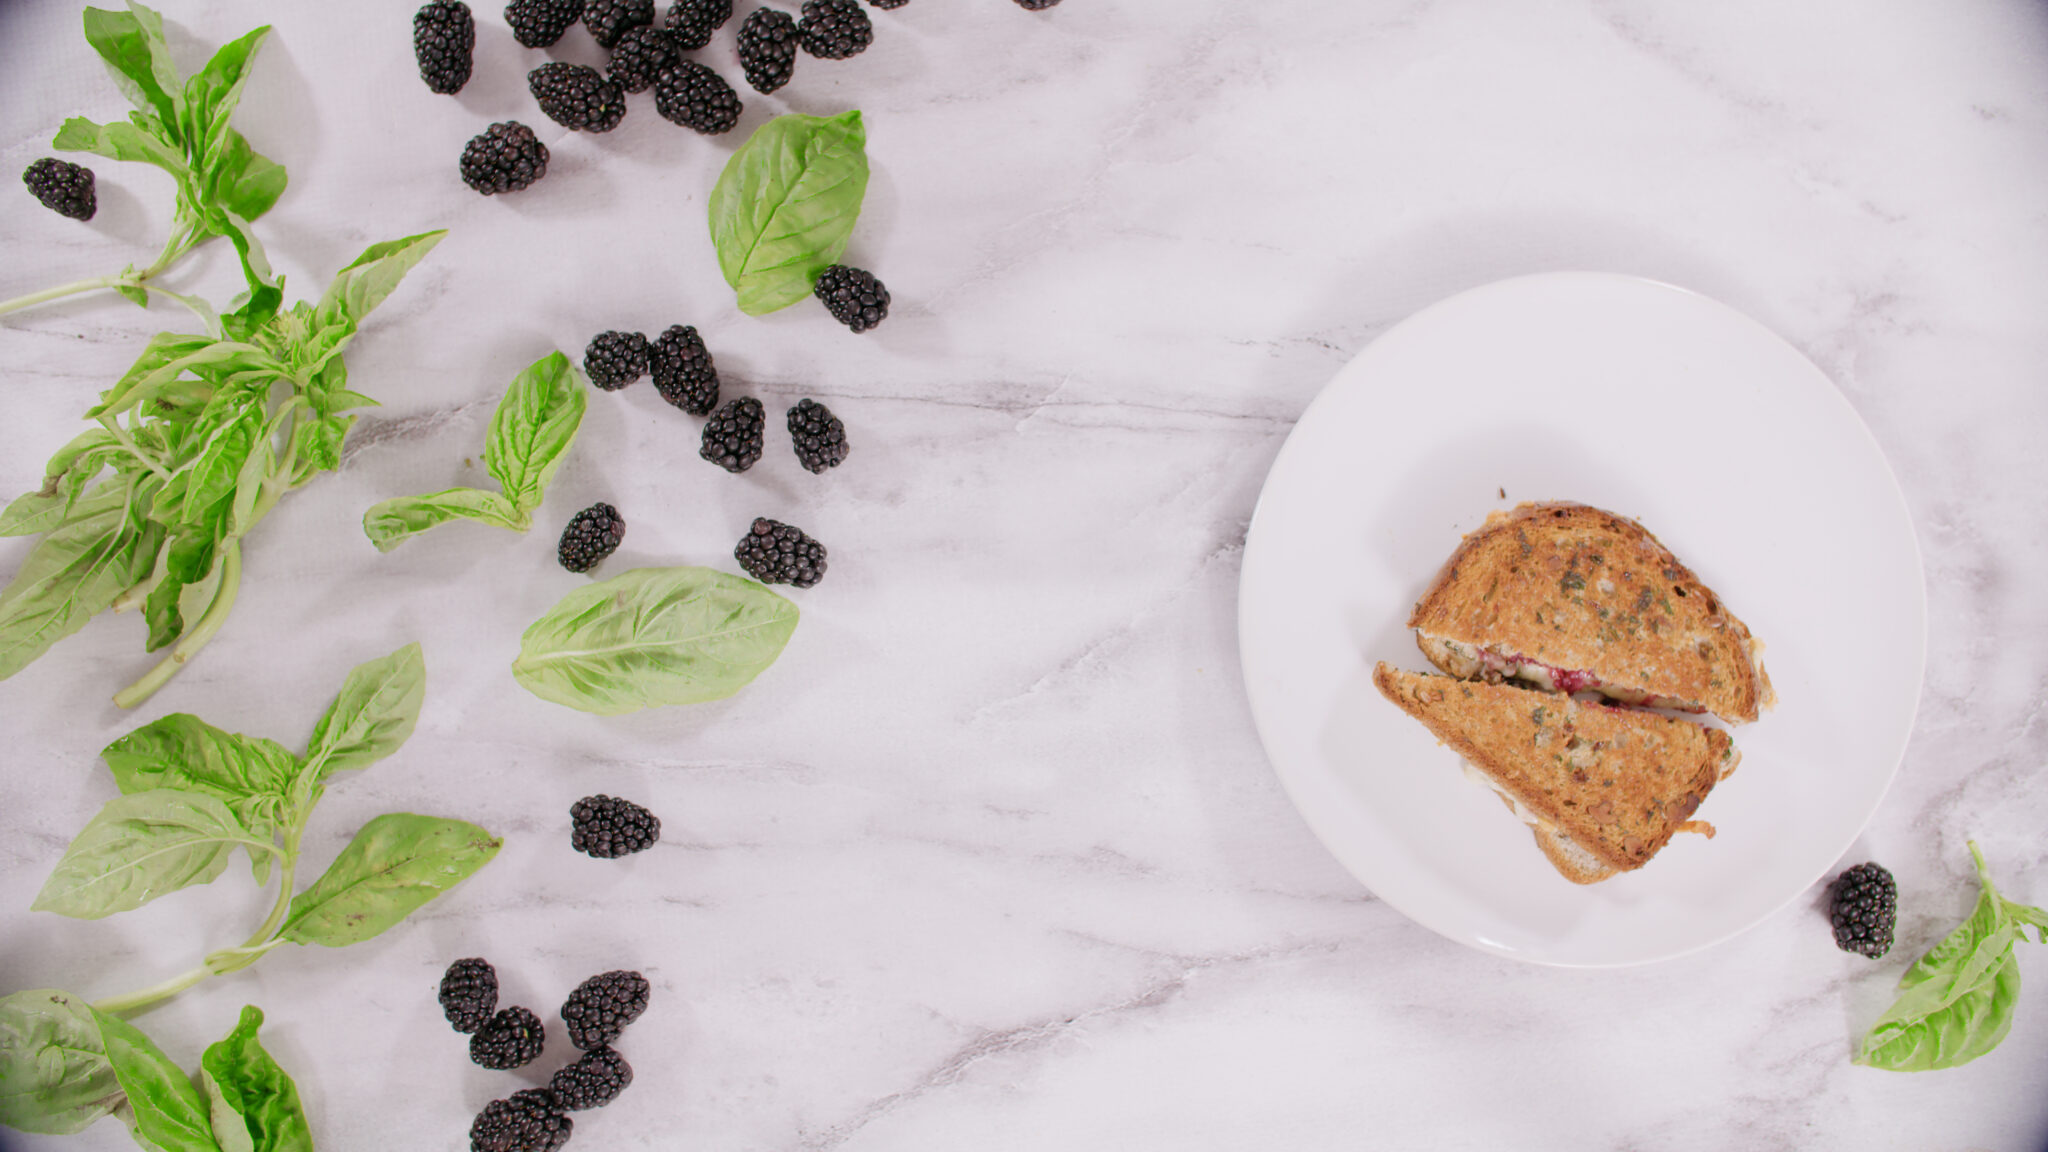 Blackberry Balsamic & Basil Grilled Cheese